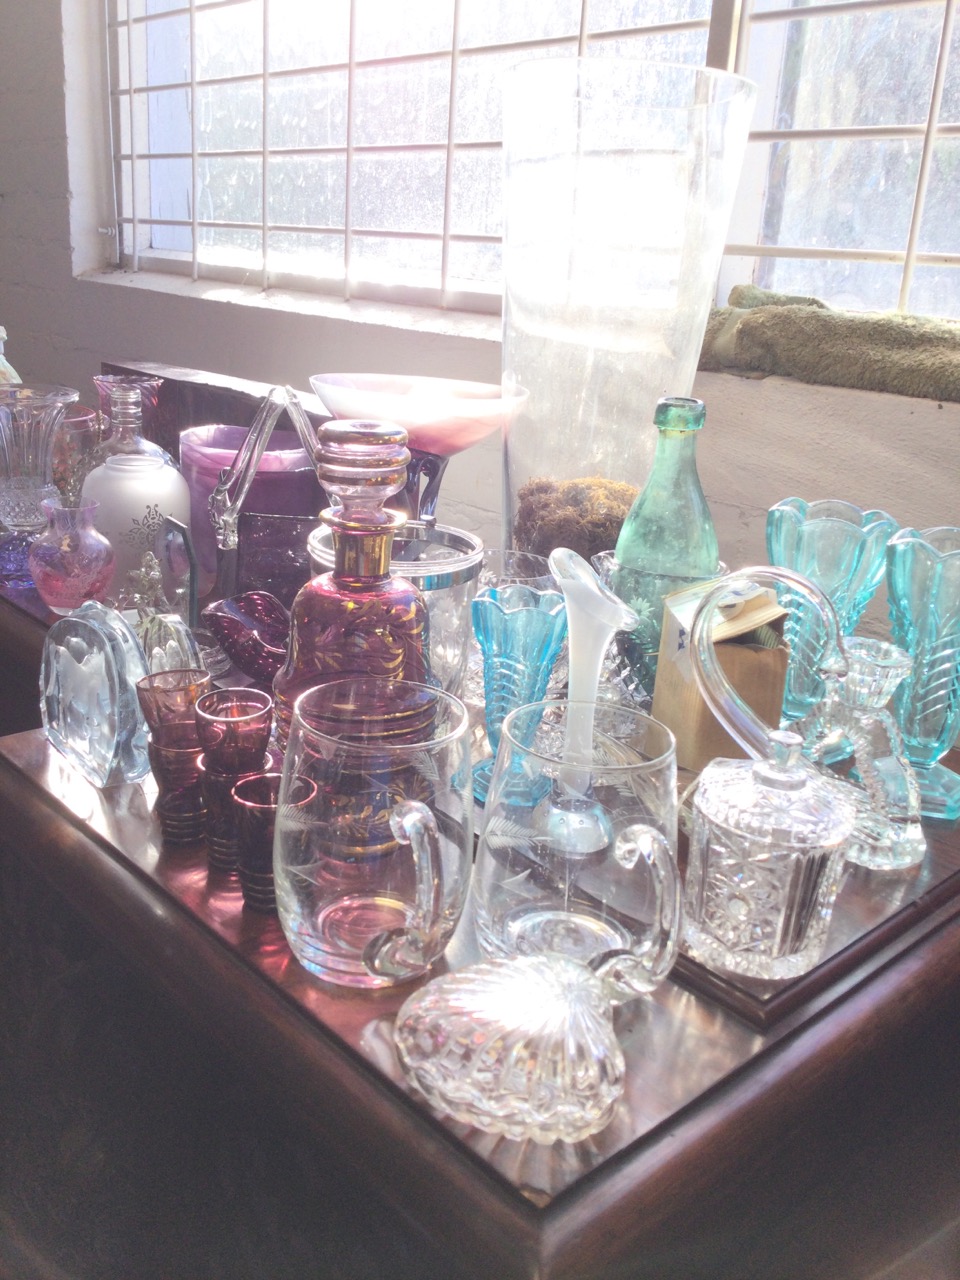 Miscellaneous glass including a pair of cut tankards, vases, Murano, trinket boxes, jam jars, art - Image 3 of 3